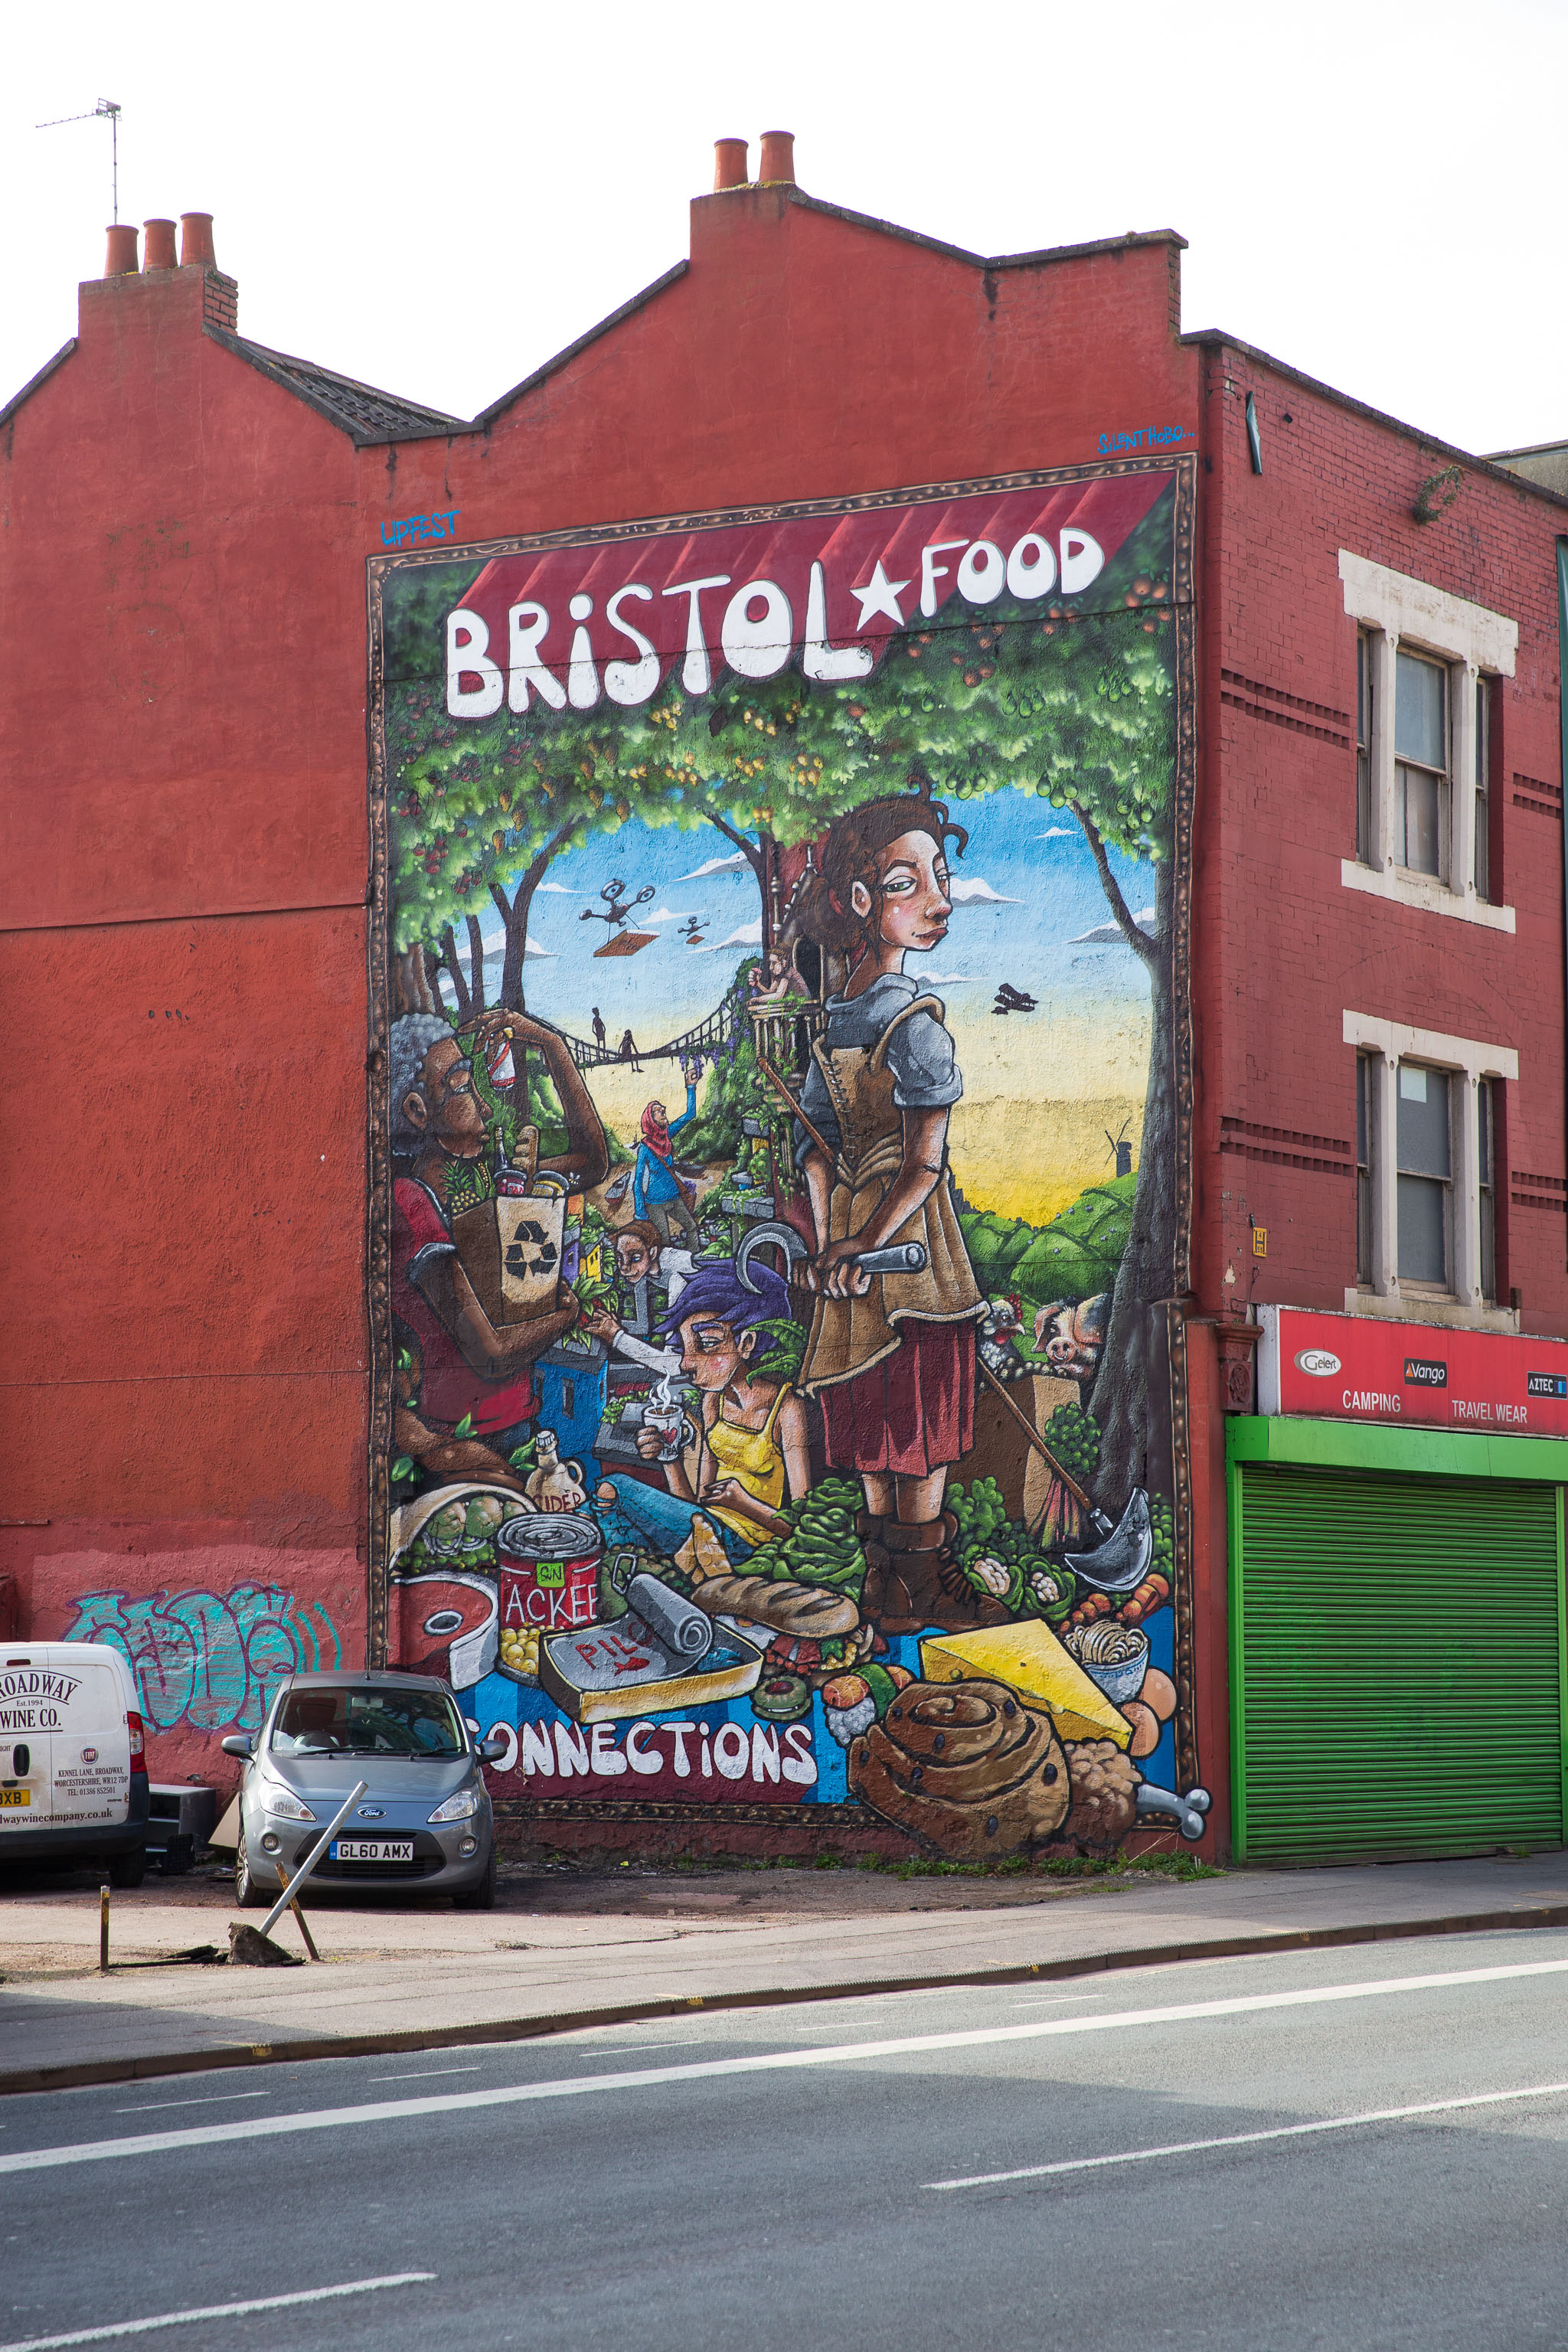 Bristol Food Connections
One day I'll get a decent picture of this mural without a sodding car parked in front of it.

EDIT: I never did, and now they've built flats in fro...